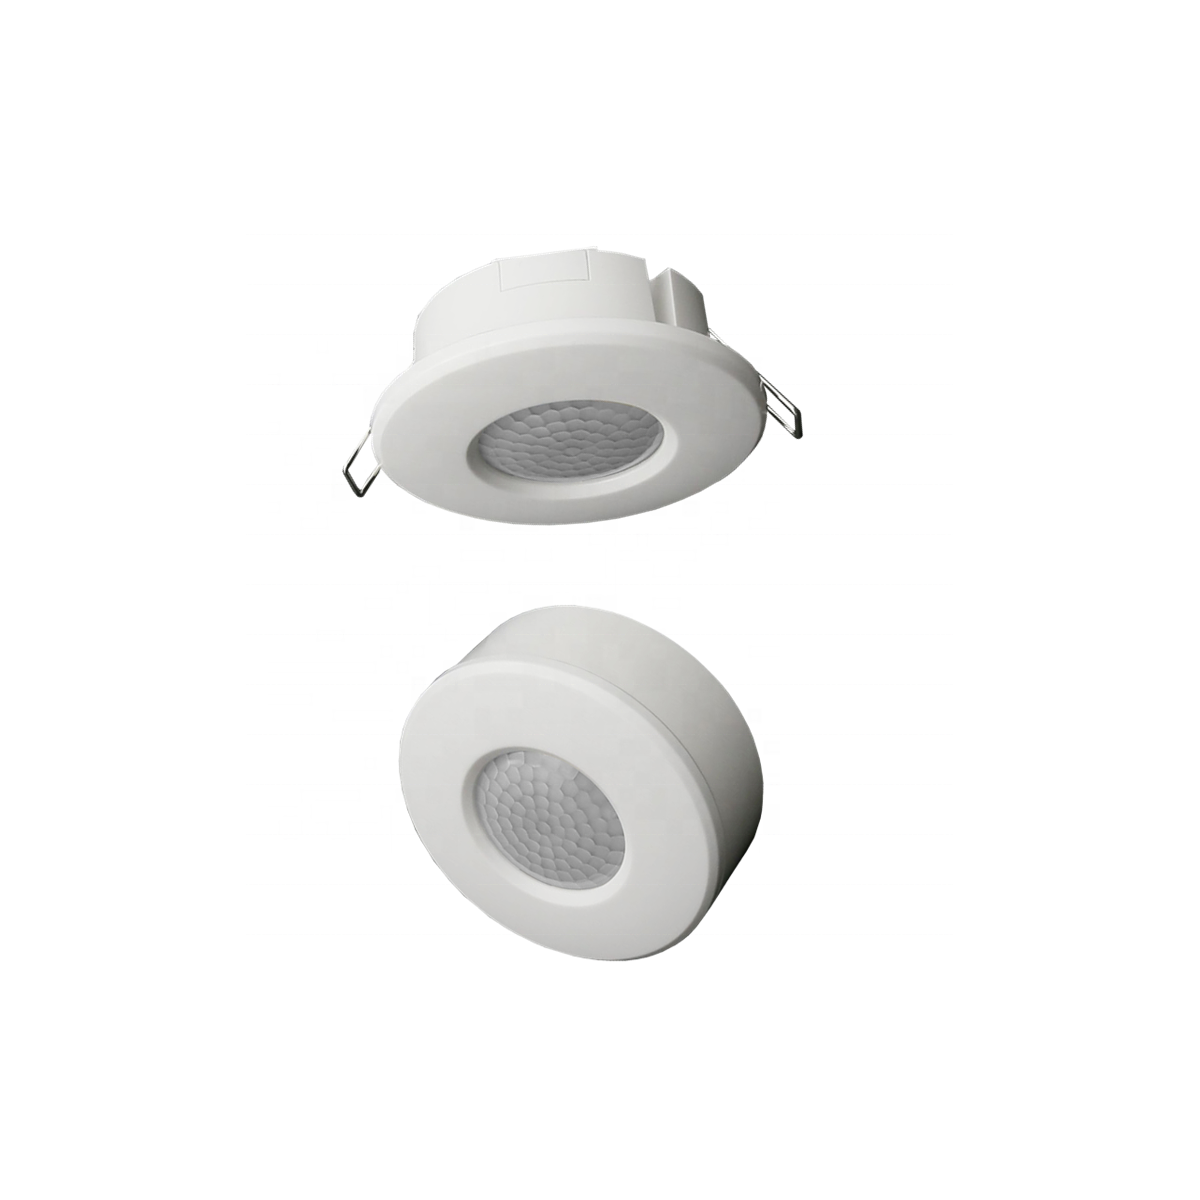 Surface and recessed motion sensor